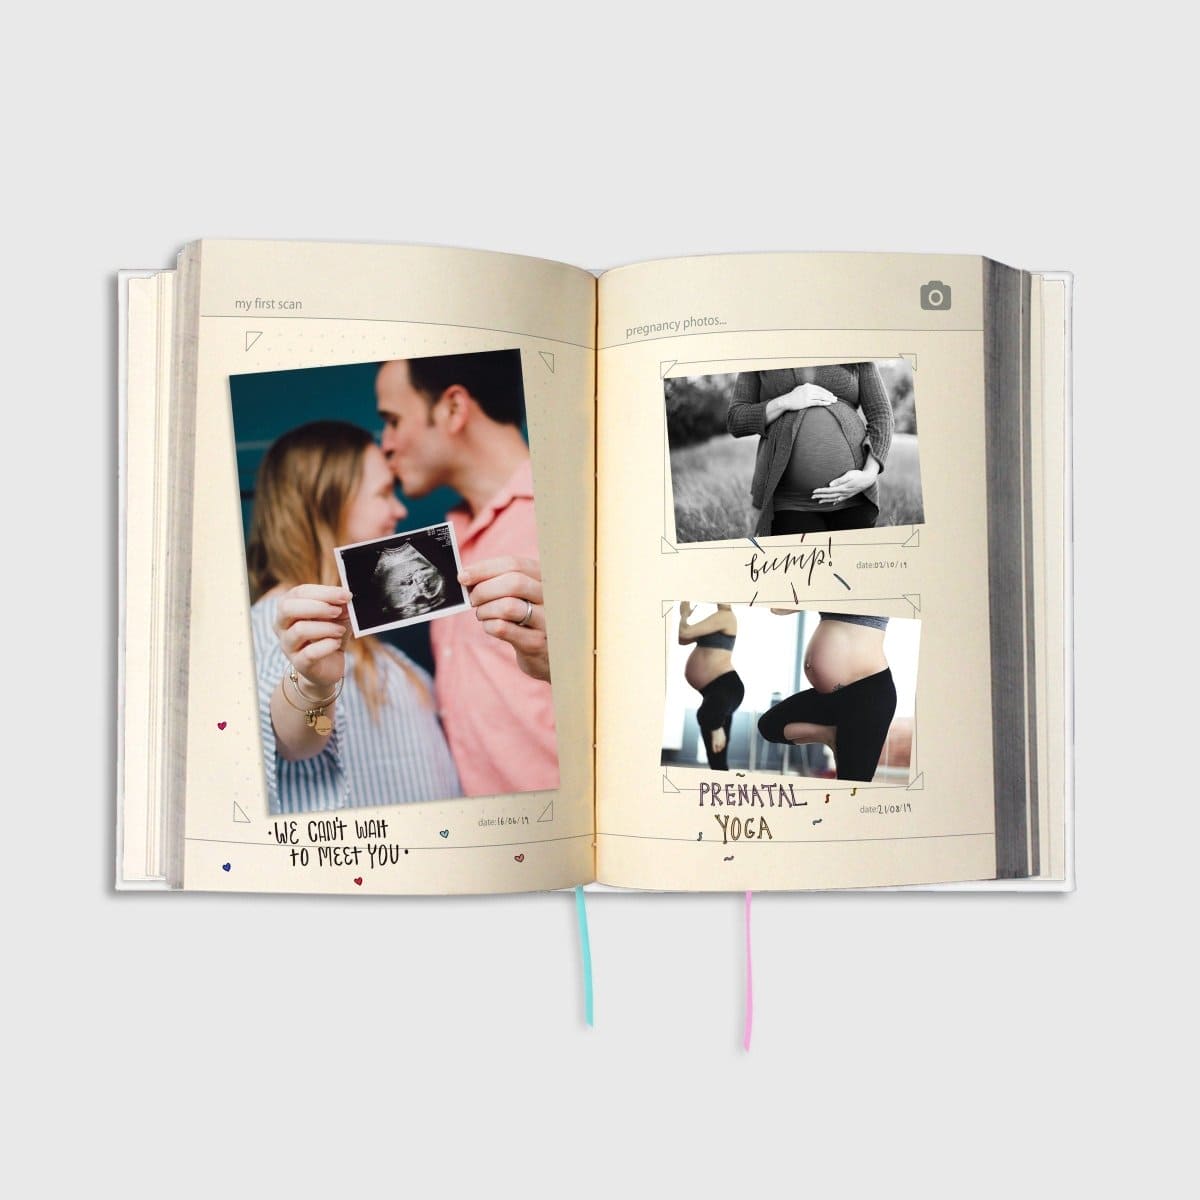 My Baby Book First Baby Years Journal, Create Lifelong Memories - My Baby Journal by Luckies